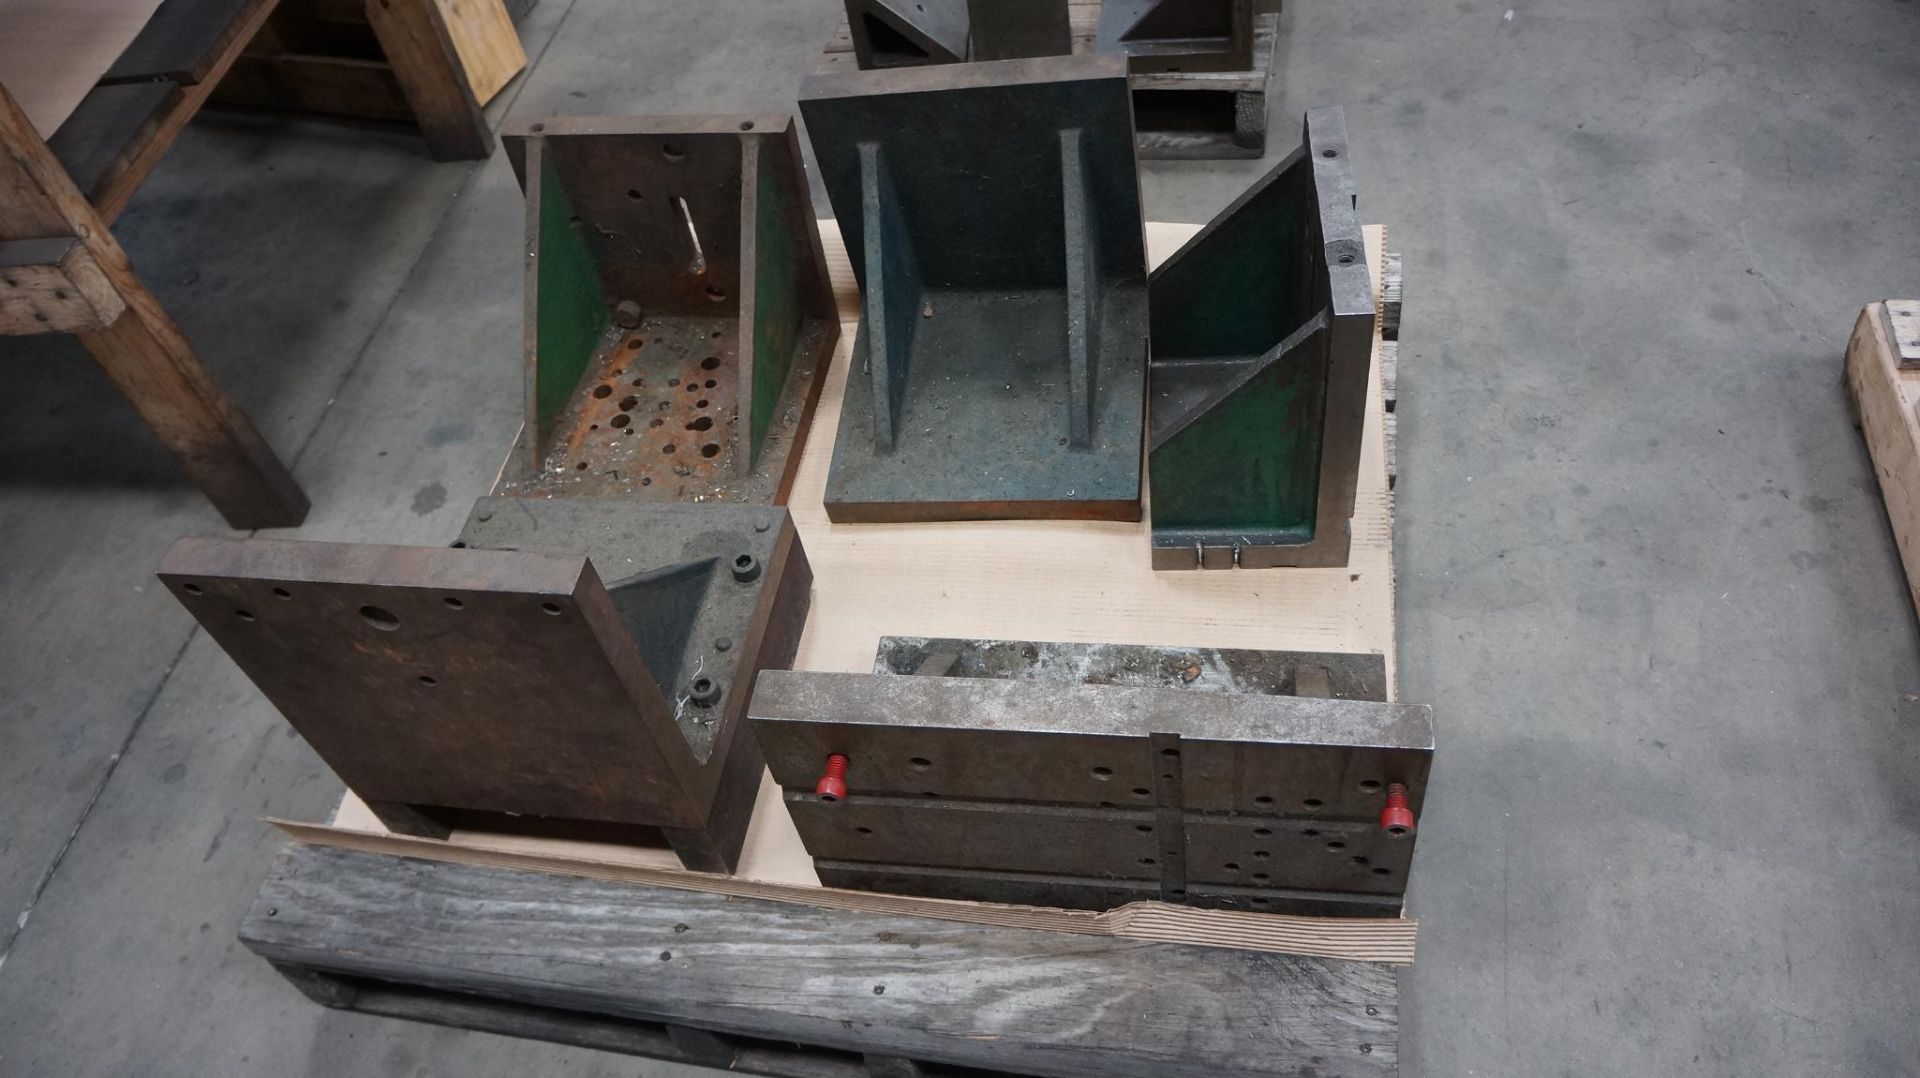 LOT OF ANGLE PLATES (THREE PALLETS) approx. (15) ranging in size from 12" x 24"W. x 17" tall to 5" x - Image 6 of 8